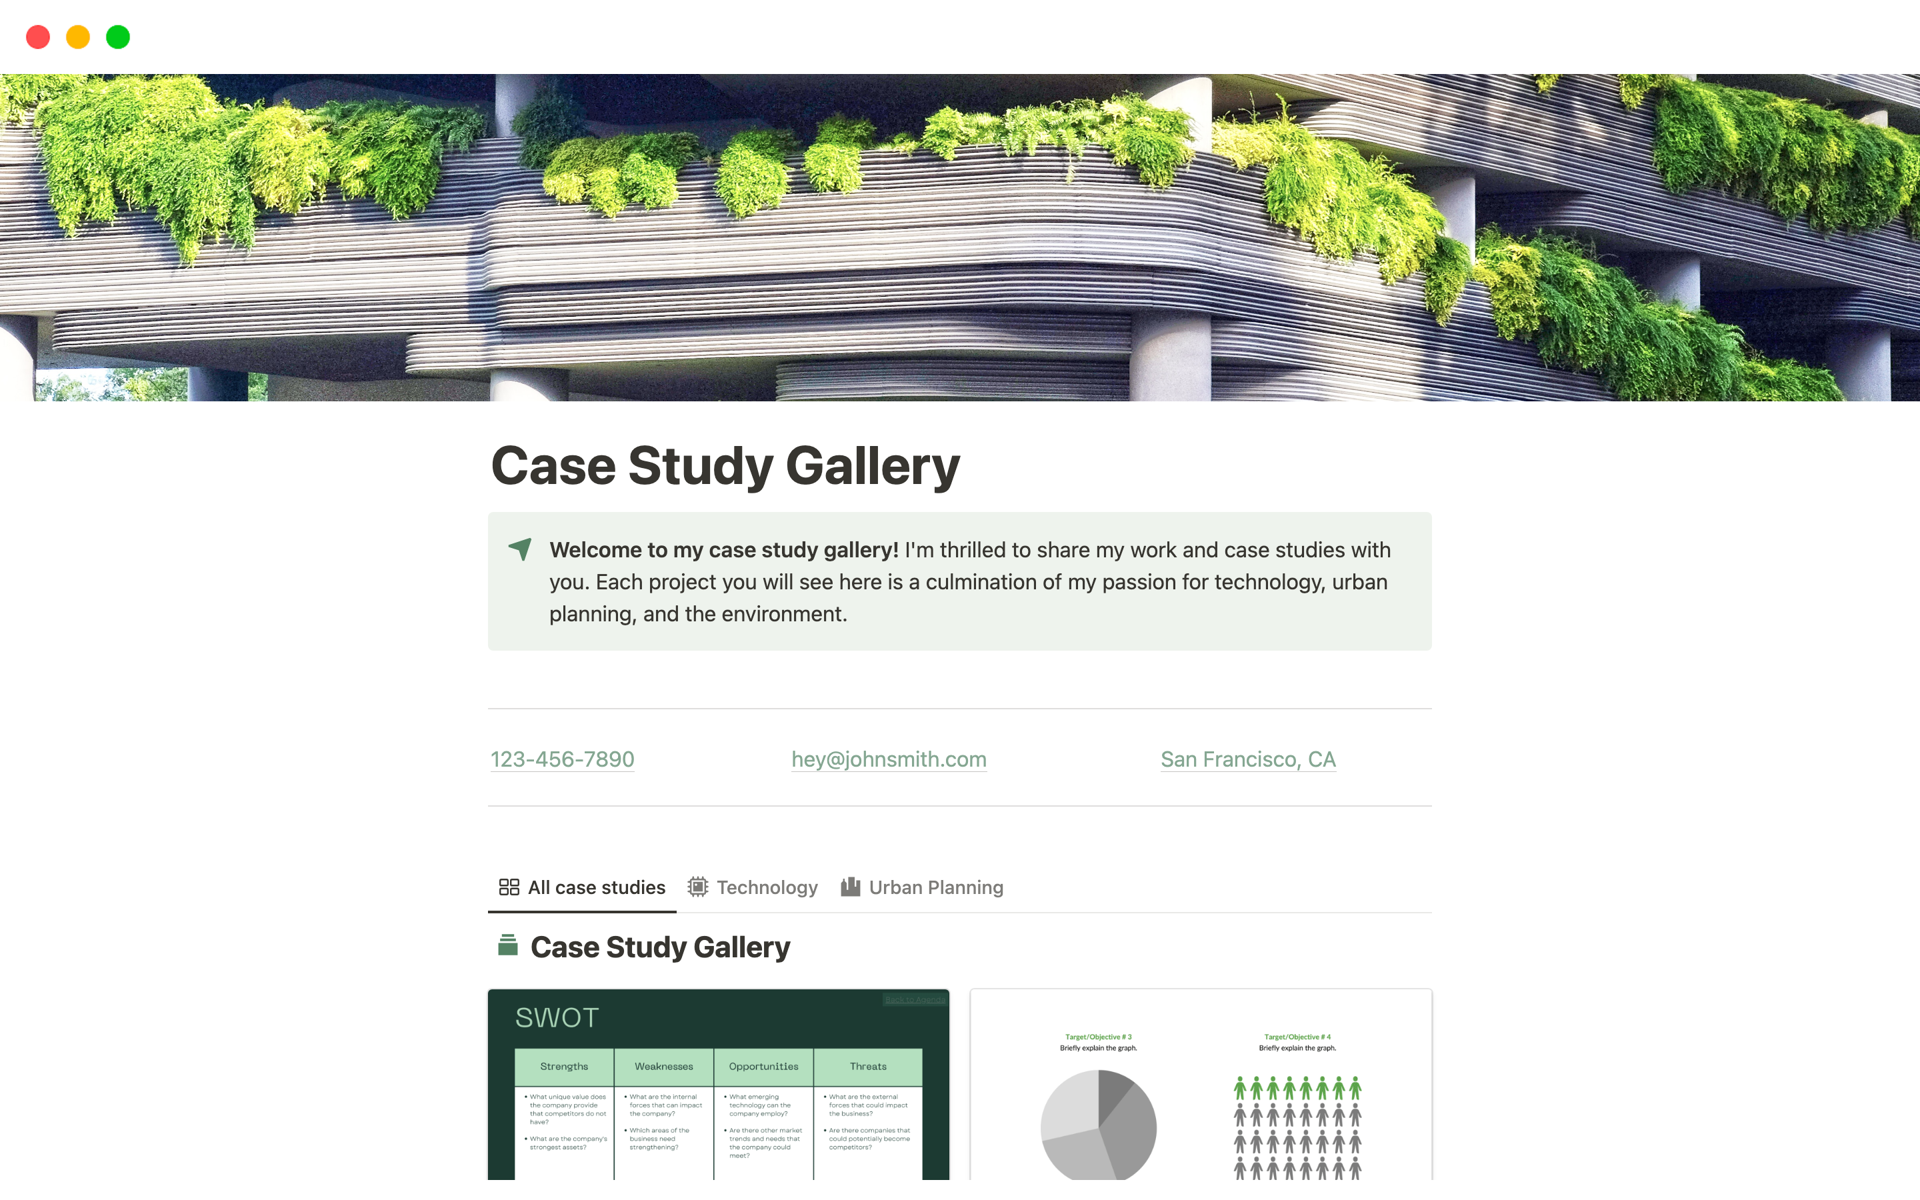 Easily showcase your case studies to the world.